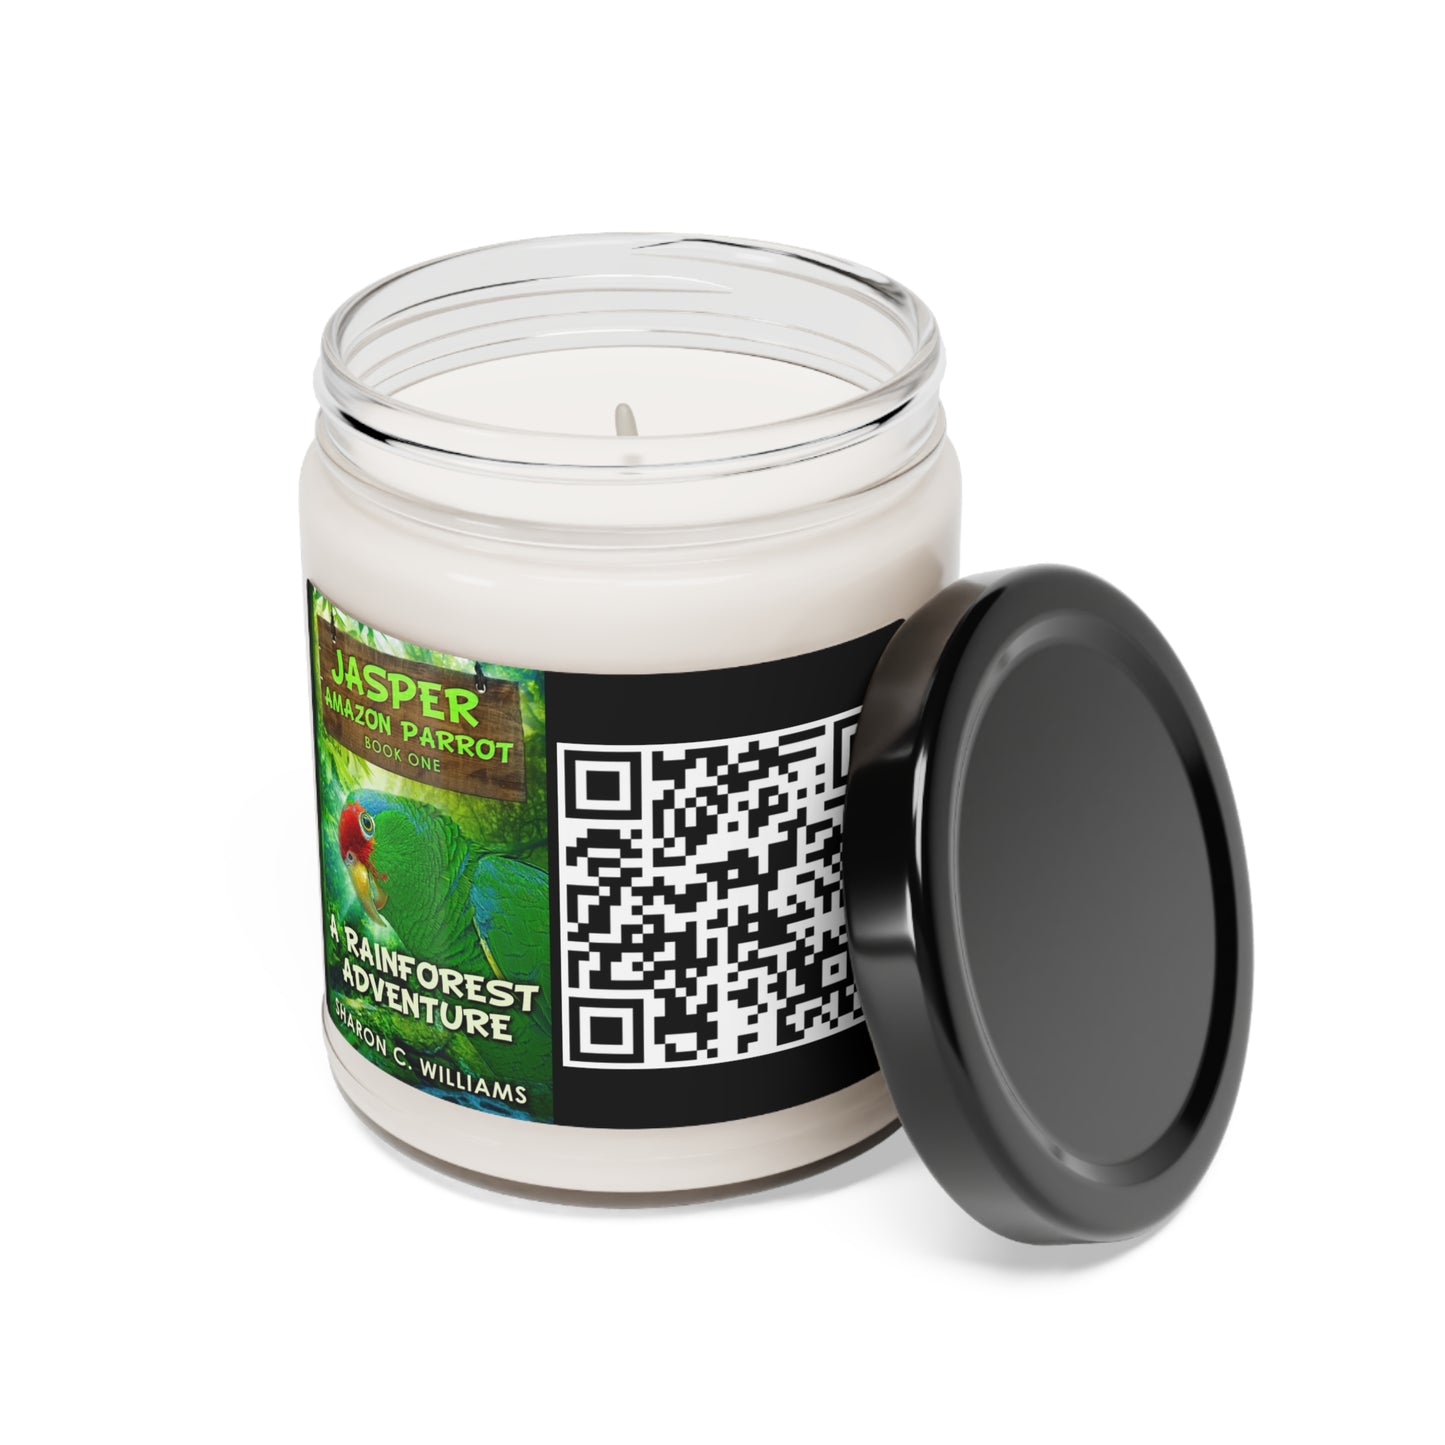 A Rainforest Adventure - Scented Soy Candle